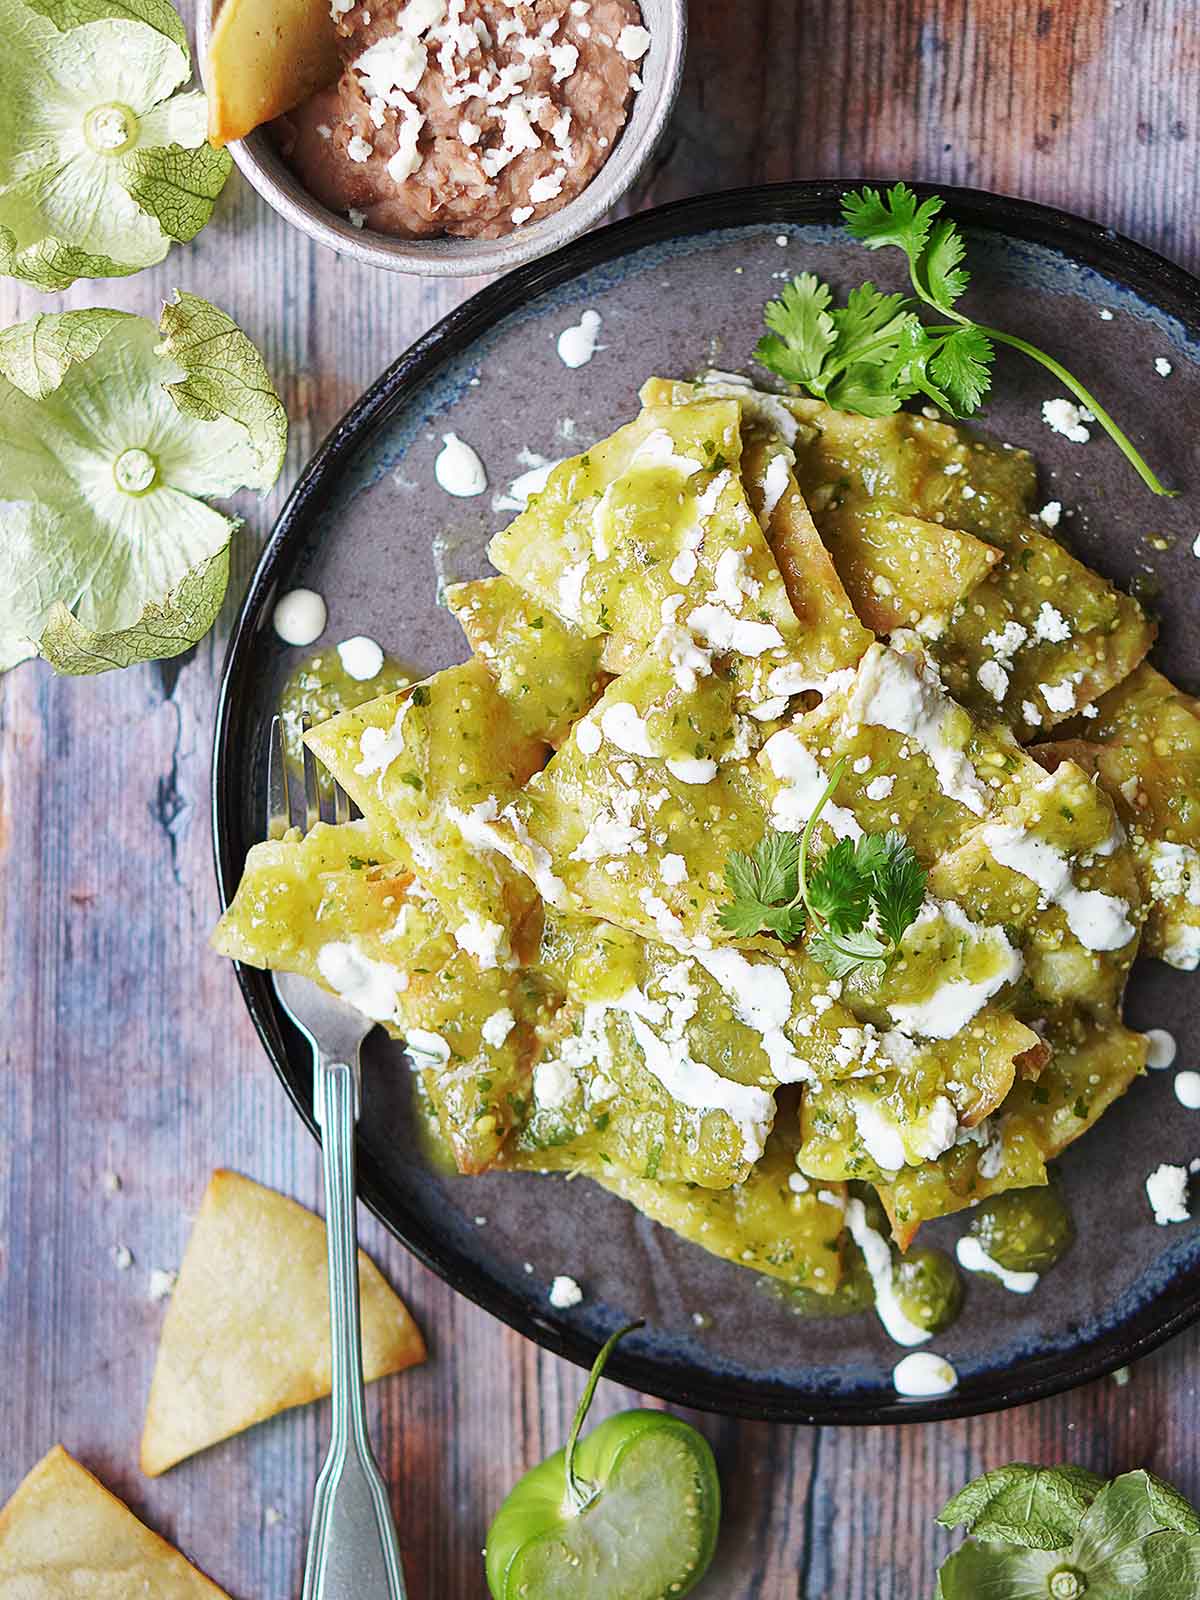 A plate with chilaquiles verdes drizzled with mexican crema and garnished with a cilantro sprig.